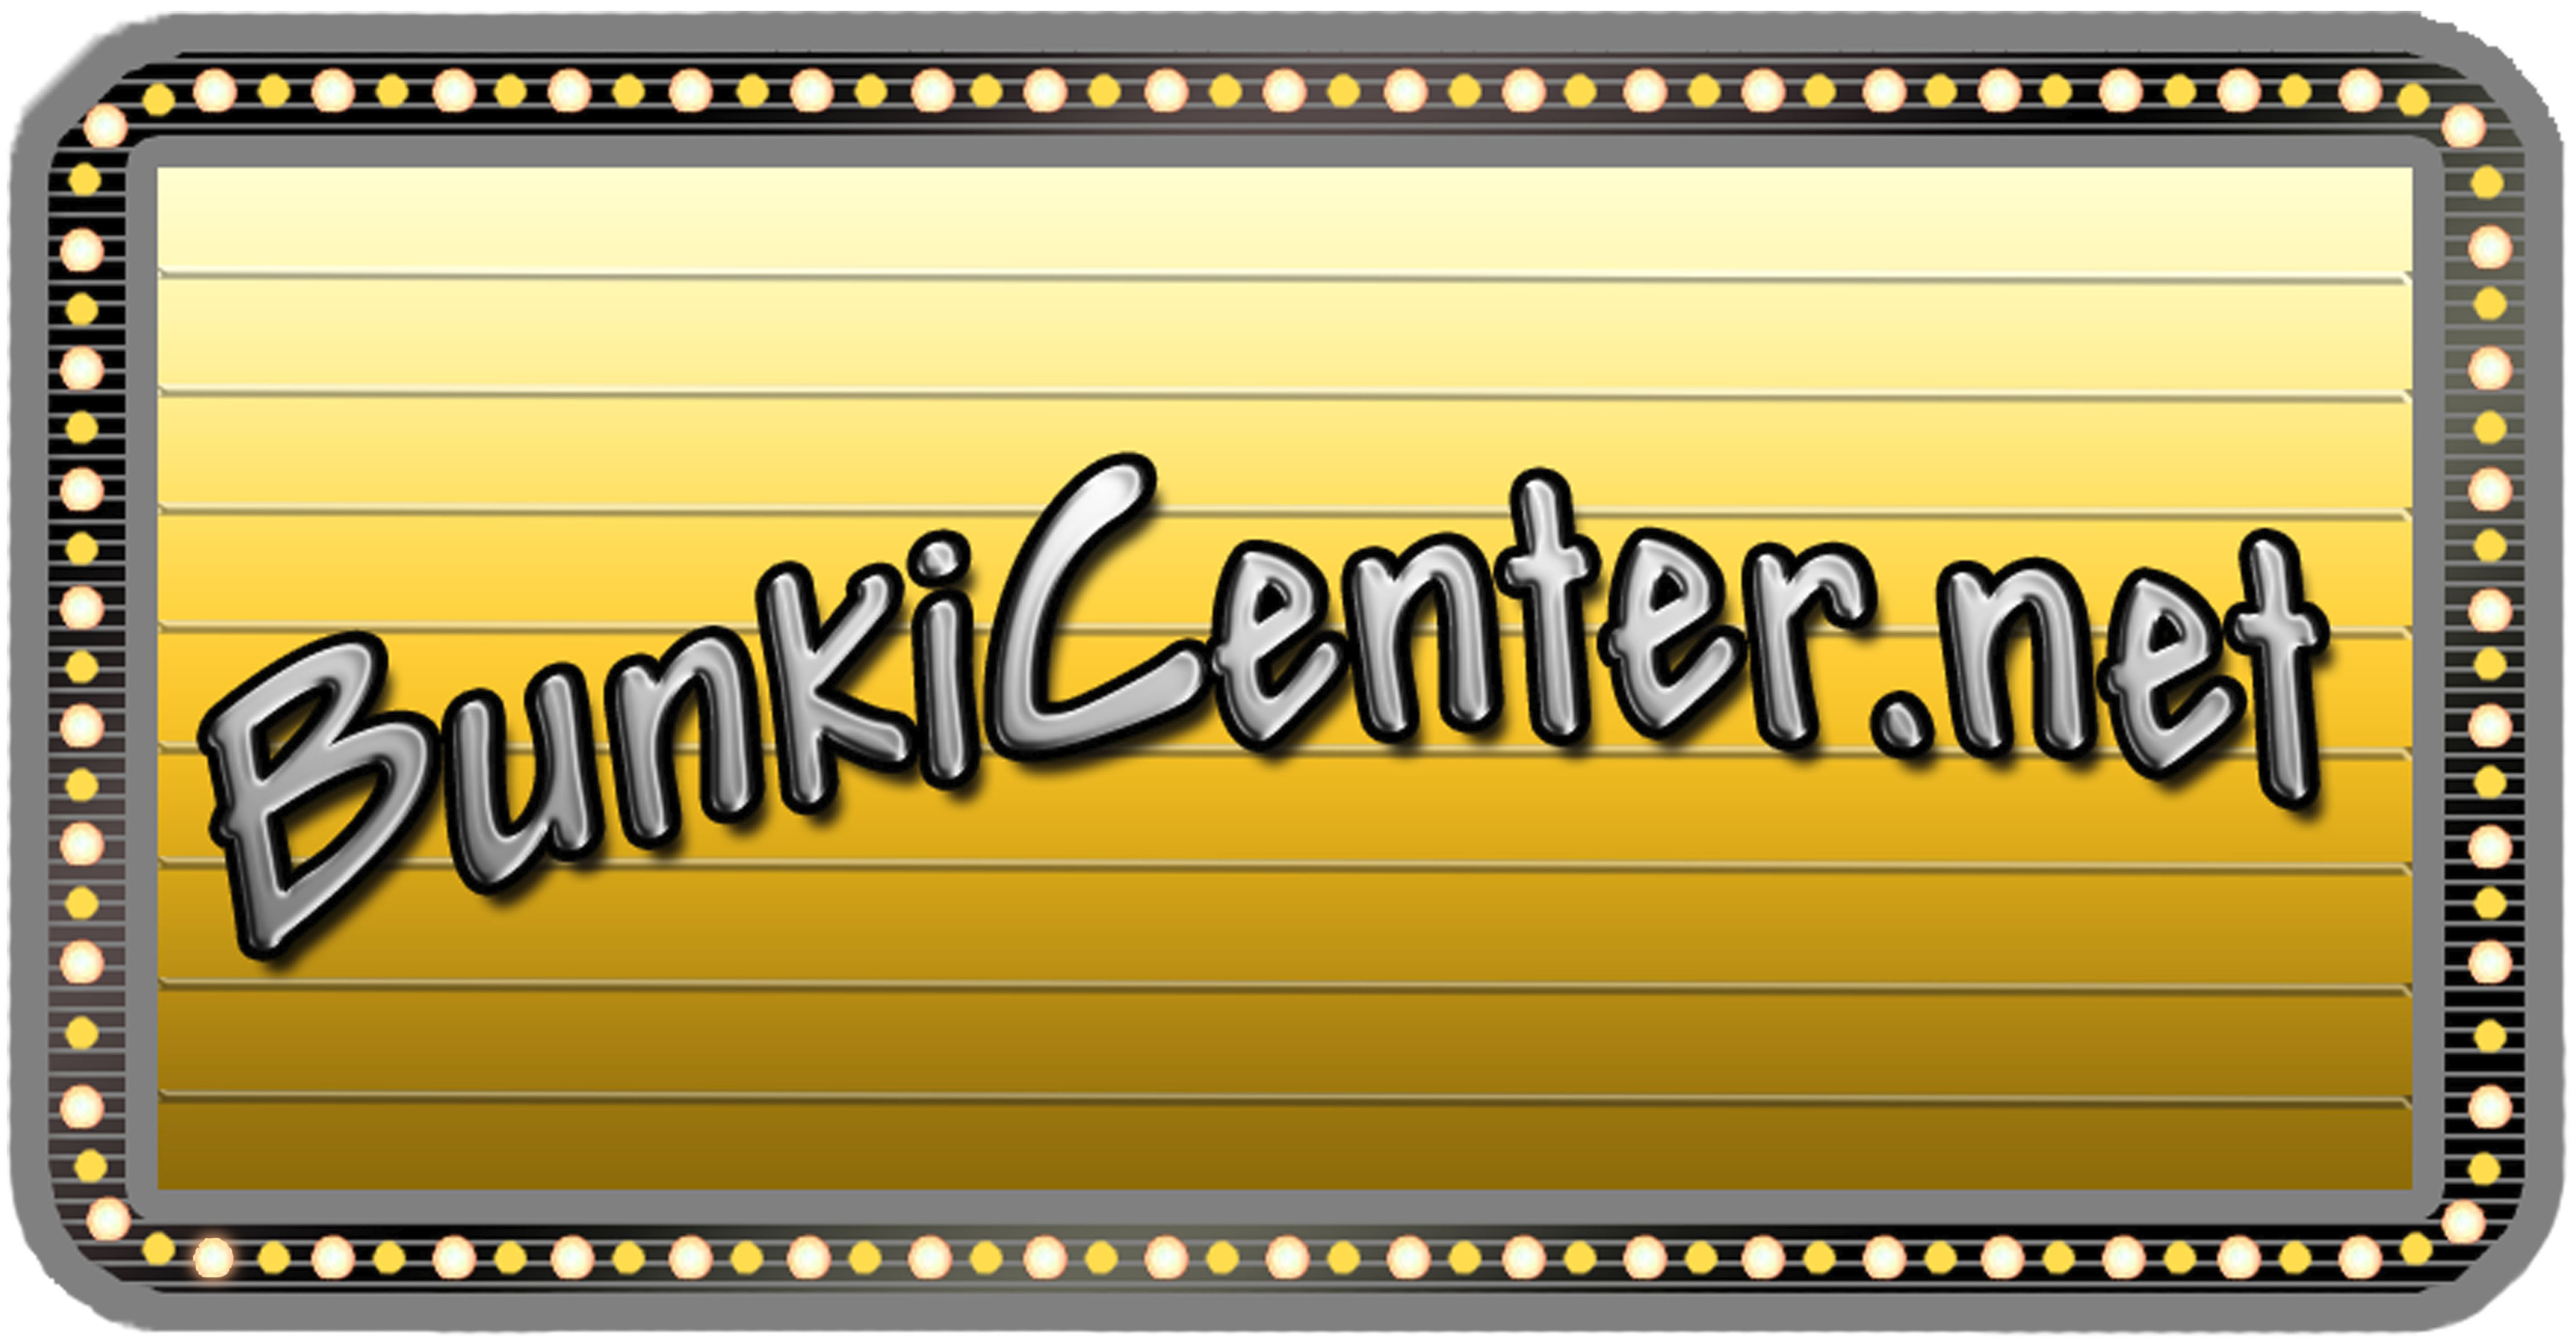 The BunkiCenter logo: It has a gold background, with silver text which is outlined in black and slightly curves. The B in Bunki is just below the T in .Net. The border is designed to look like a billboard, with a large then a small light placed for every other light. The lights run around the inner perimeter, which is black. The text: BunkiCenter.net is centered on the billboard.